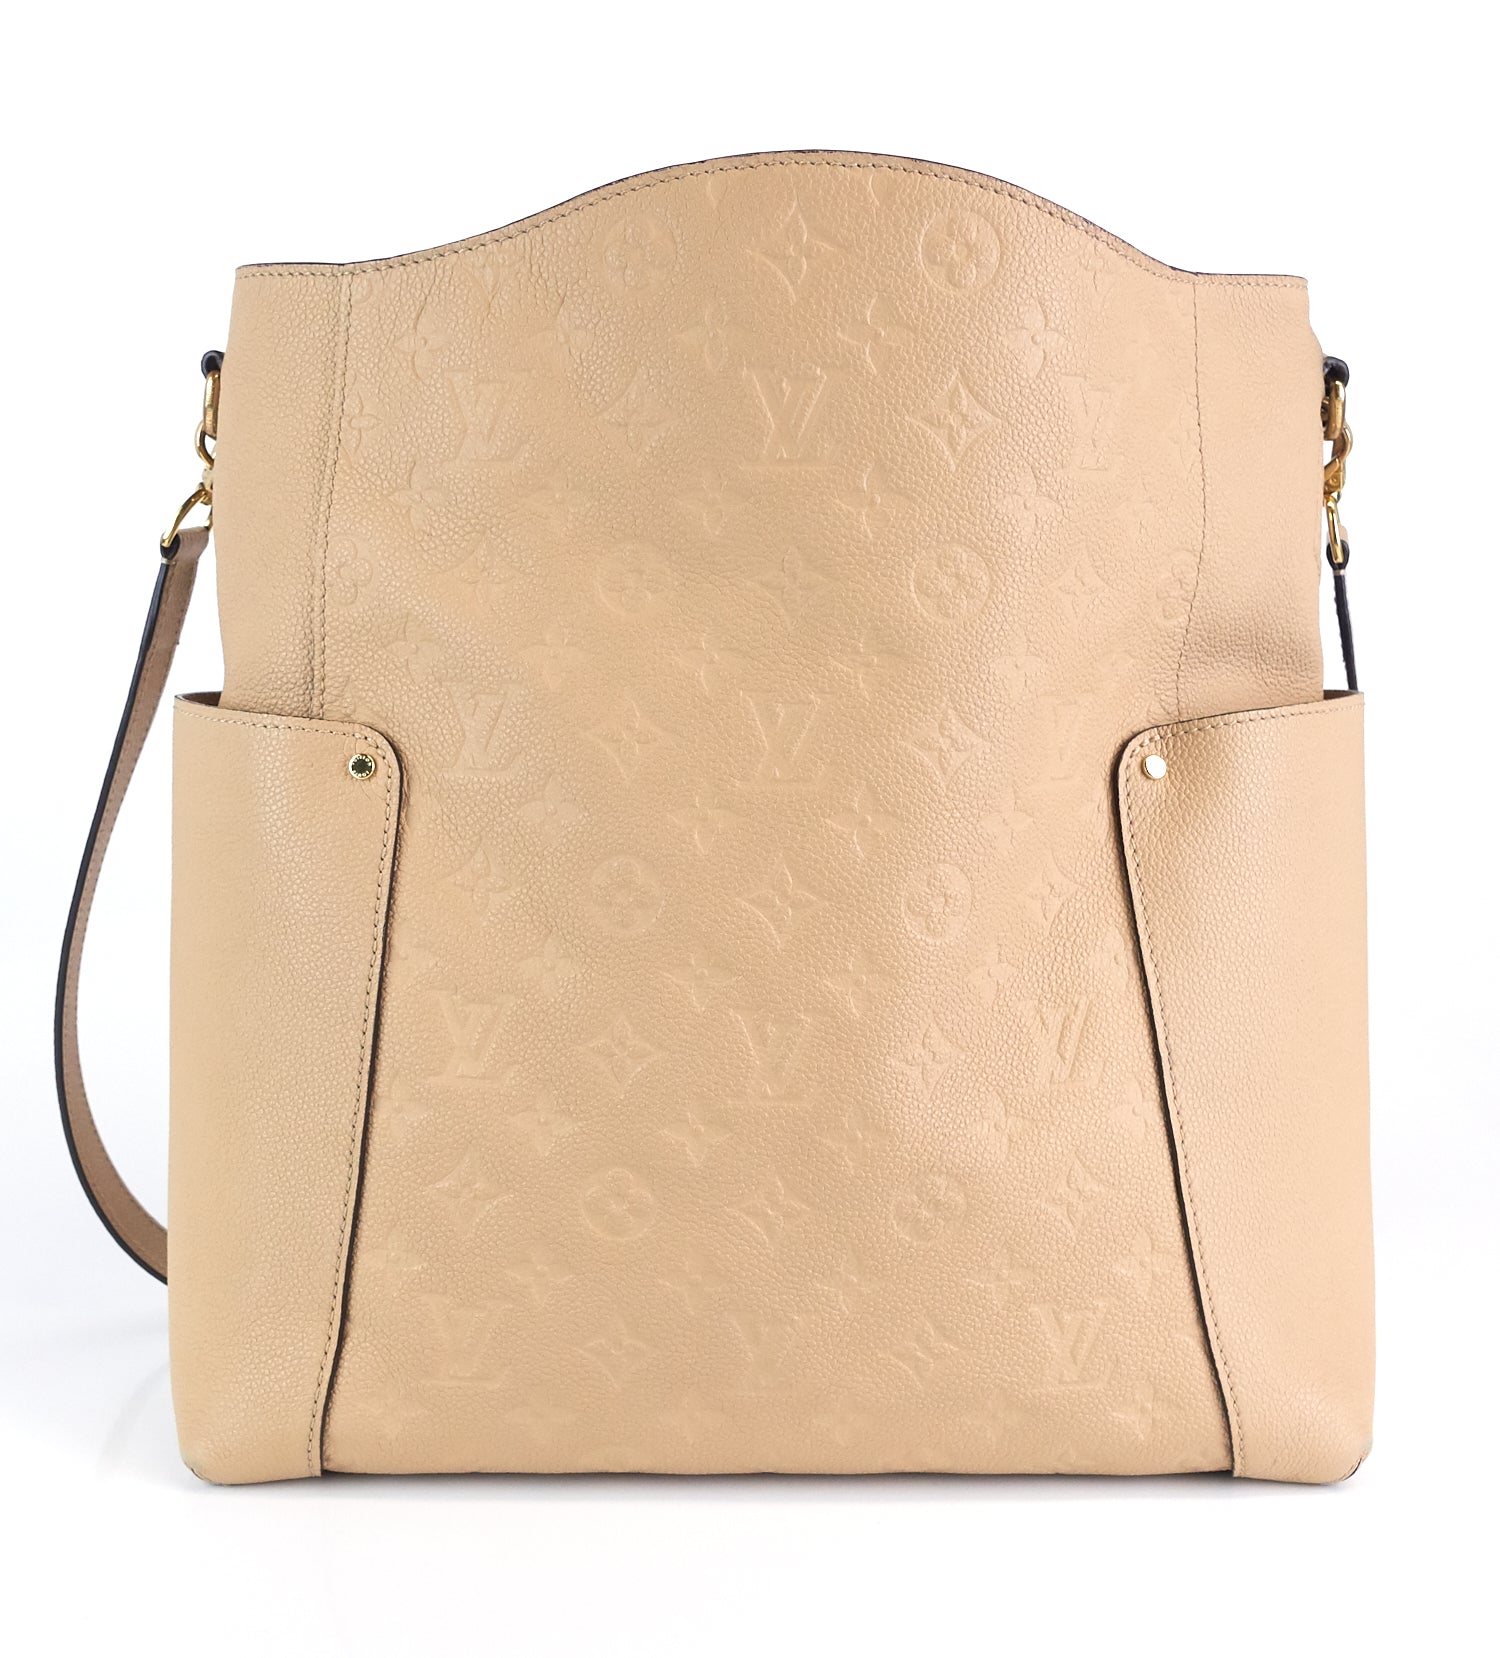 Louis Vuitton Bagatelle BB Mini Hobo bag in Monogram Different-Colored  Leather M46113 Beige/Yellow/Pink 2022